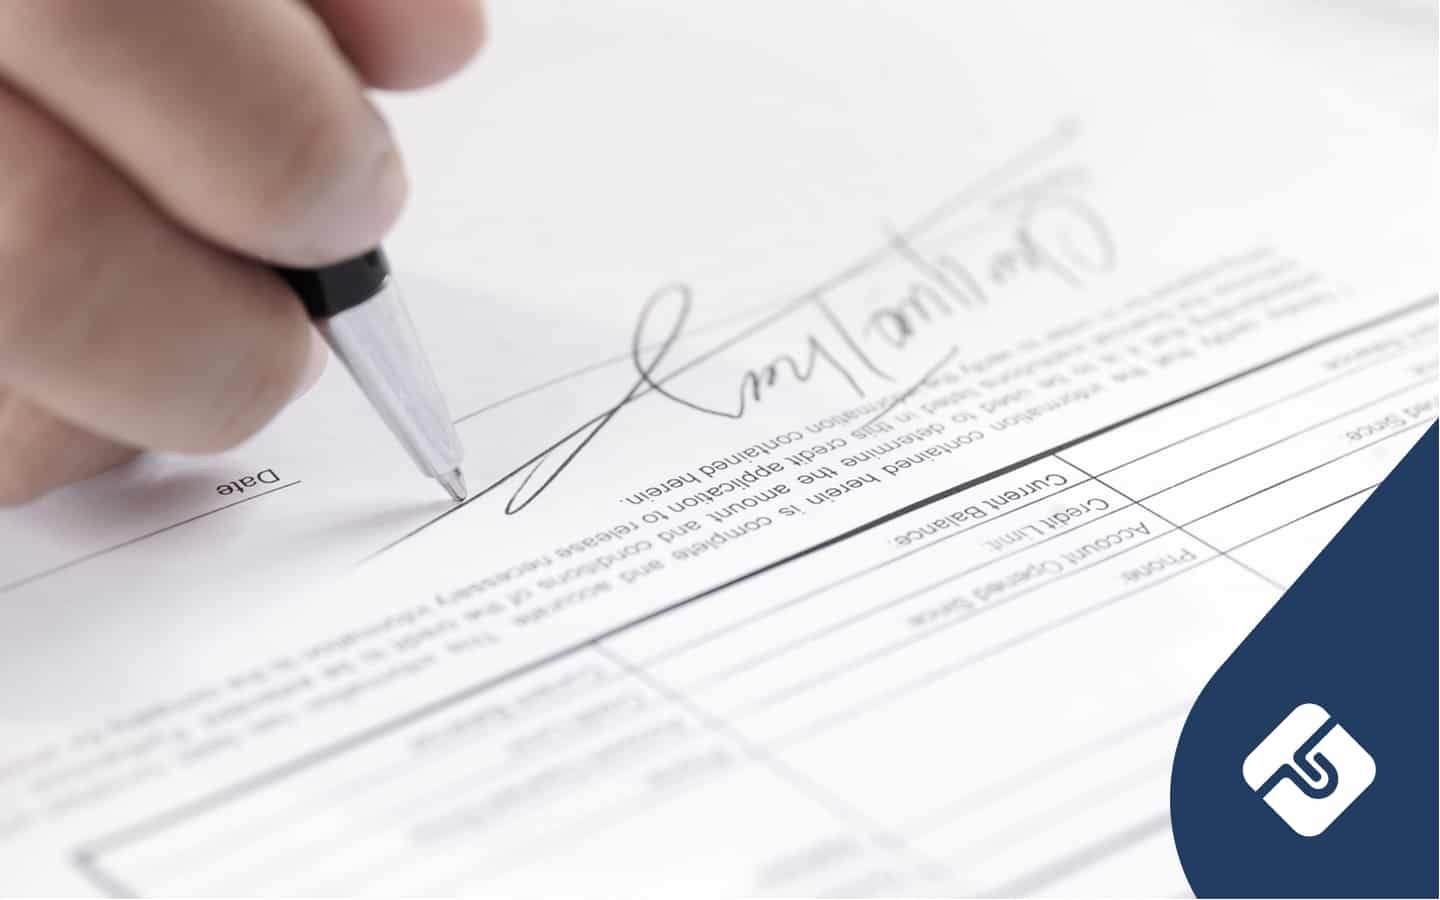 Is Legal to Sign on Someone Else's Behalf? -